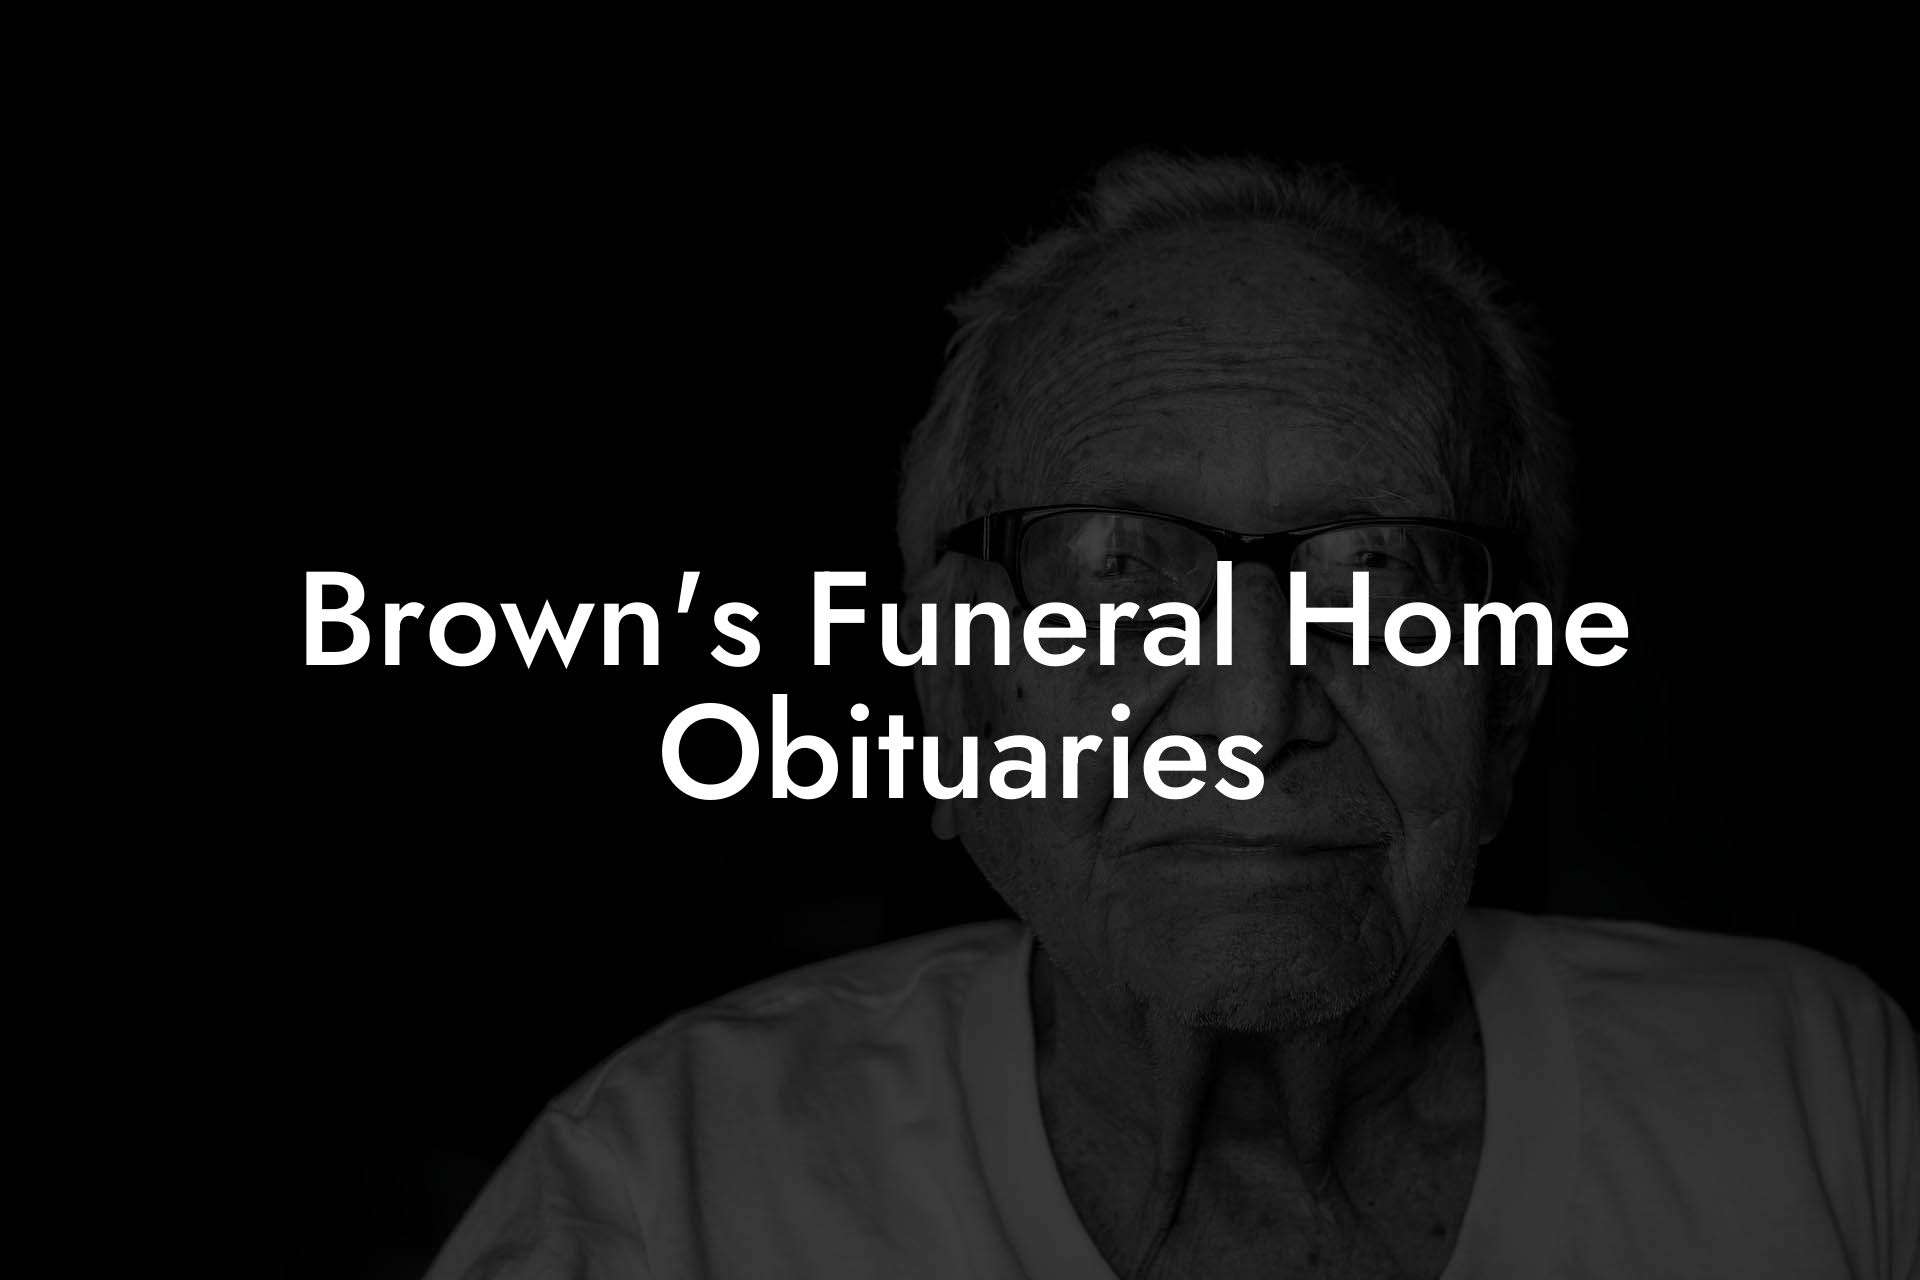 Brown's Funeral Home Obituaries